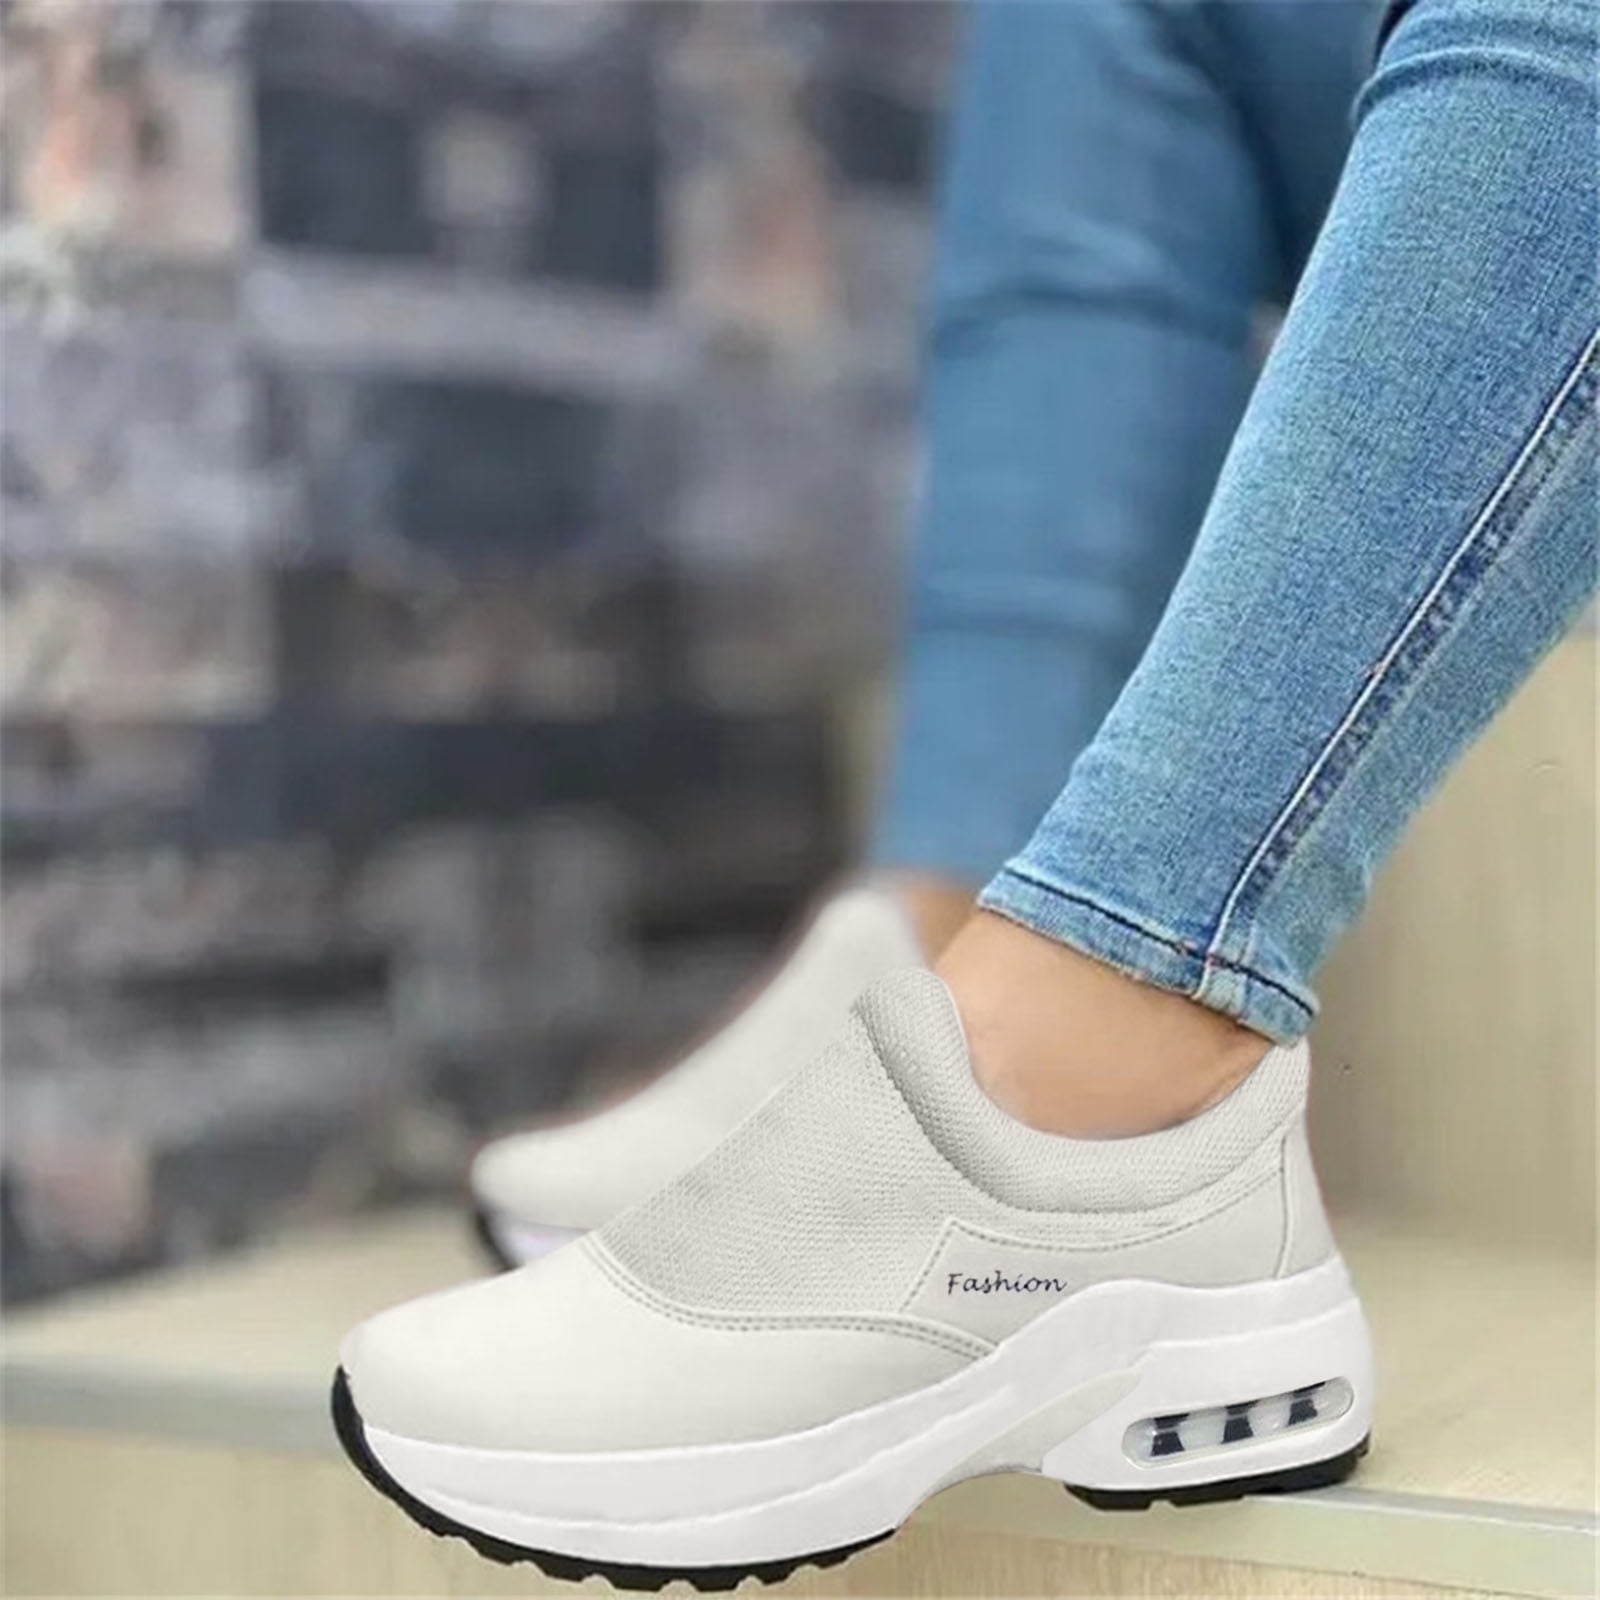 Caicj98 Womens Running Shoes Womens Canvas Shoes Casual Cute Sneakers Low Cut Lace Up Fashion Comfortable for Walking,Light Blue, Women's, Size: One